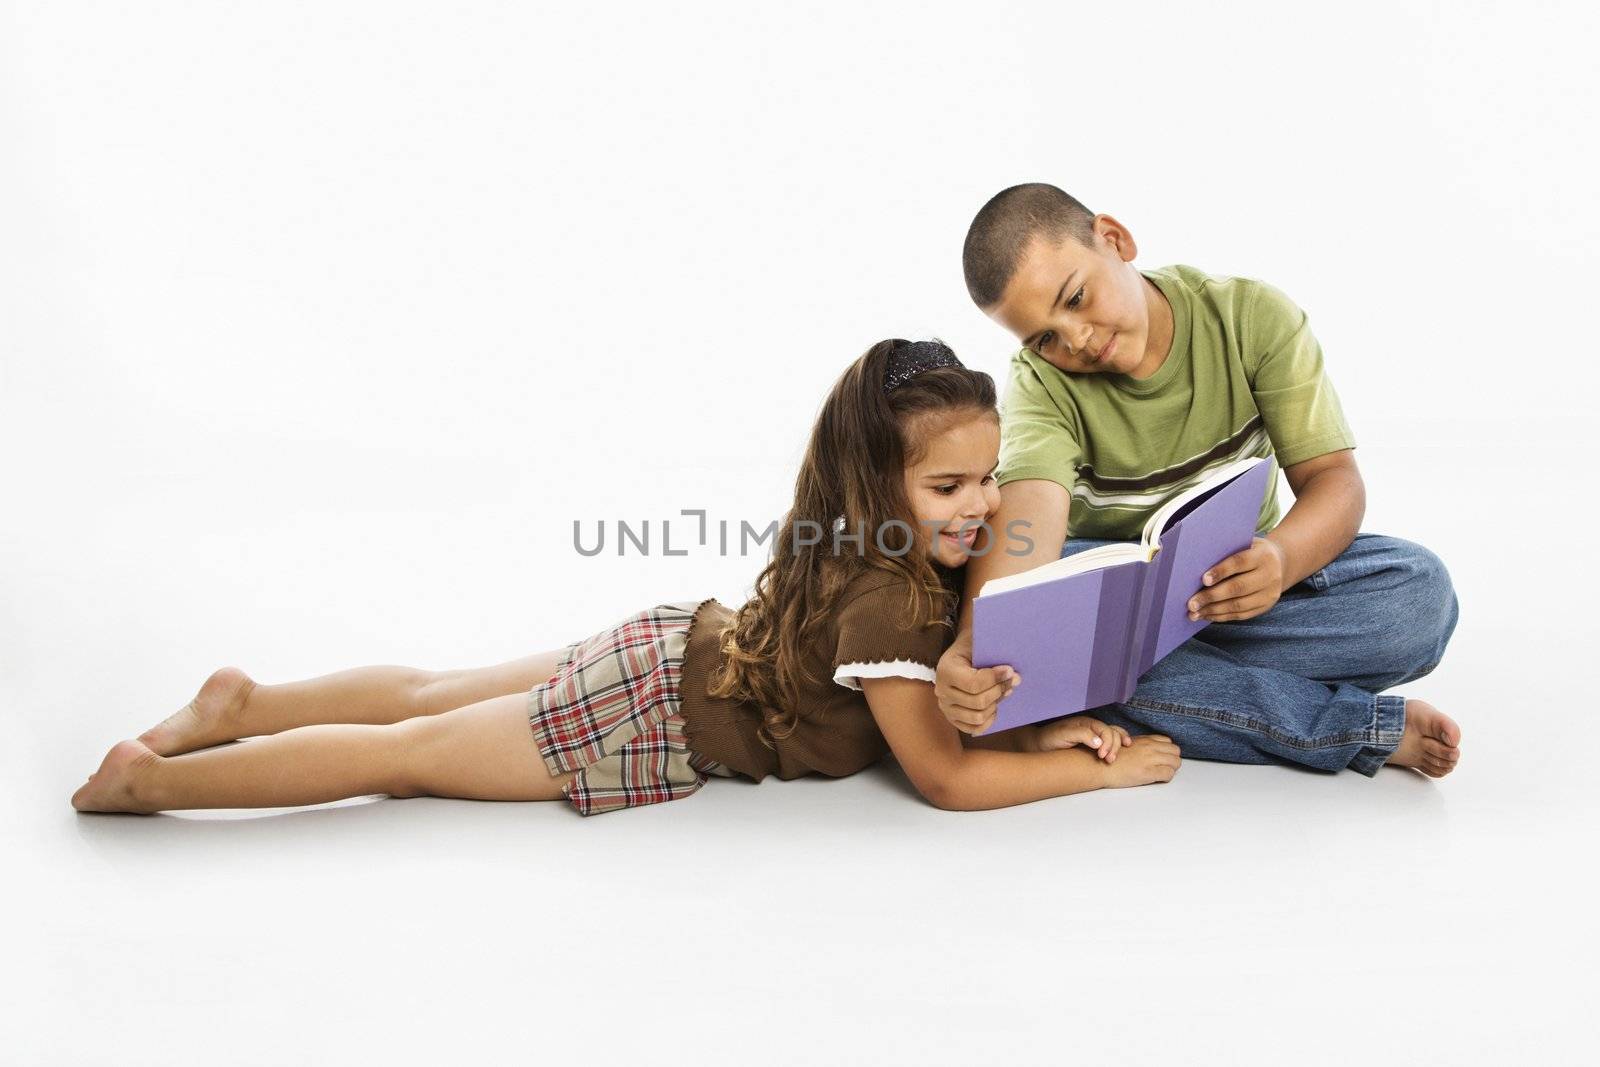 Brother and sister reading book together.